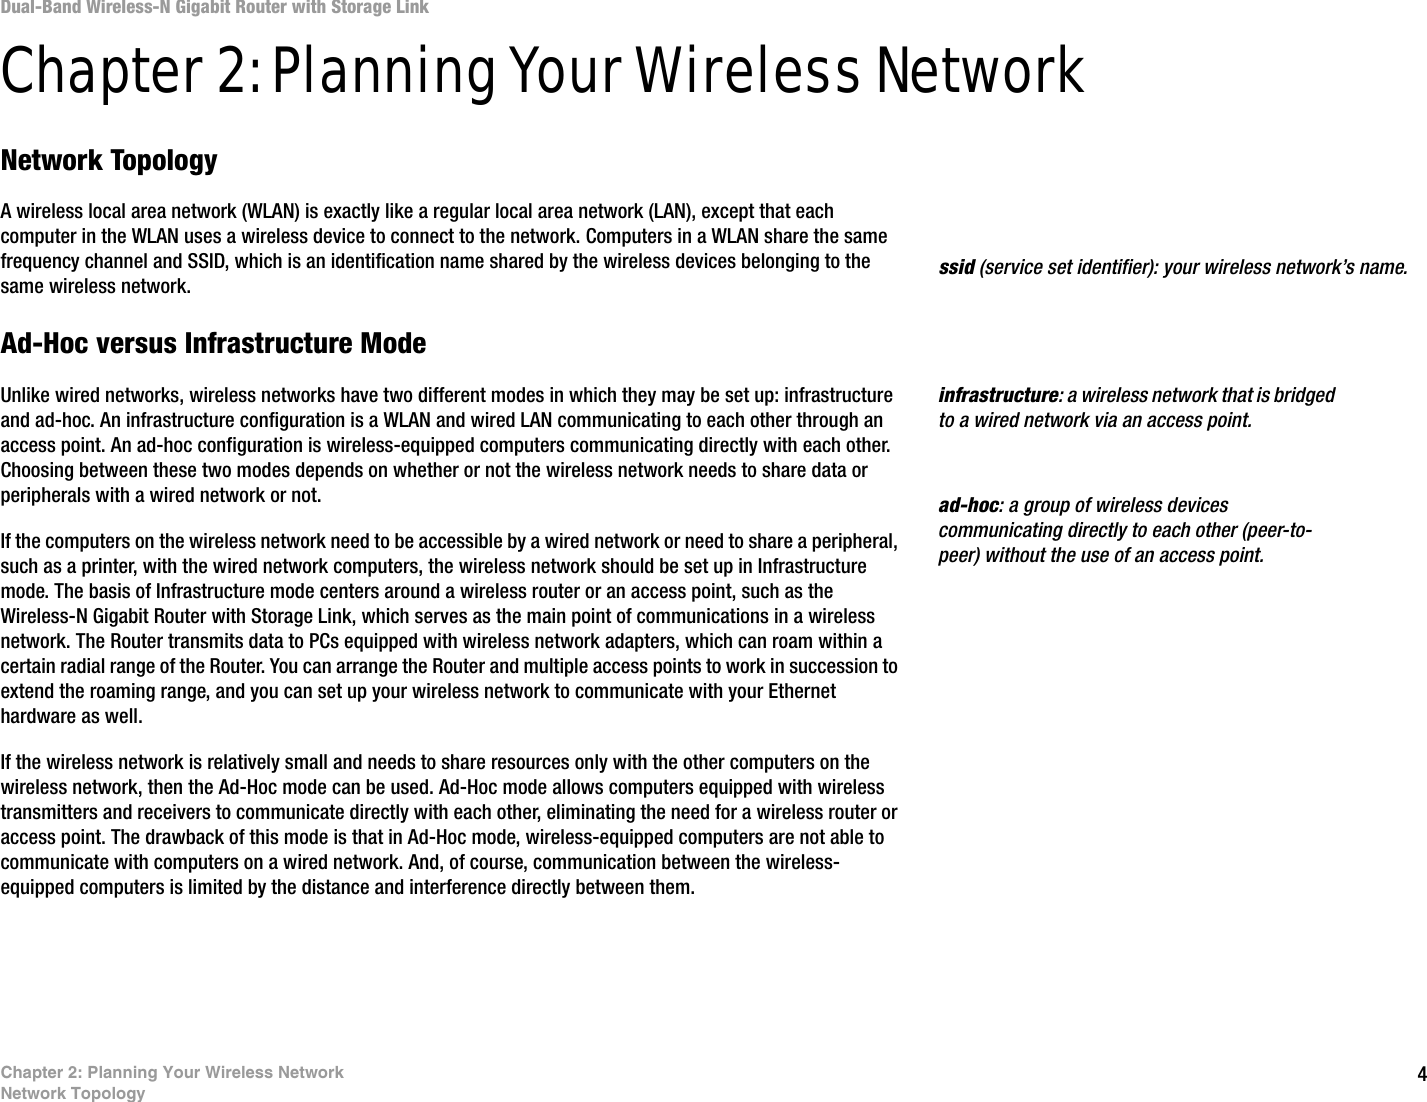 4Chapter 2: Planning Your Wireless NetworkNetwork TopologyDual-Band Wireless-N Gigabit Router with Storage LinkChapter 2: Planning Your Wireless NetworkNetwork TopologyA wireless local area network (WLAN) is exactly like a regular local area network (LAN), except that each computer in the WLAN uses a wireless device to connect to the network. Computers in a WLAN share the same frequency channel and SSID, which is an identification name shared by the wireless devices belonging to the same wireless network.Ad-Hoc versus Infrastructure ModeUnlike wired networks, wireless networks have two different modes in which they may be set up: infrastructure and ad-hoc. An infrastructure configuration is a WLAN and wired LAN communicating to each other through an access point. An ad-hoc configuration is wireless-equipped computers communicating directly with each other. Choosing between these two modes depends on whether or not the wireless network needs to share data or peripherals with a wired network or not. If the computers on the wireless network need to be accessible by a wired network or need to share a peripheral, such as a printer, with the wired network computers, the wireless network should be set up in Infrastructure mode. The basis of Infrastructure mode centers around a wireless router or an access point, such as the Wireless-N Gigabit Router with Storage Link, which serves as the main point of communications in a wireless network. The Router transmits data to PCs equipped with wireless network adapters, which can roam within a certain radial range of the Router. You can arrange the Router and multiple access points to work in succession to extend the roaming range, and you can set up your wireless network to communicate with your Ethernet hardware as well. If the wireless network is relatively small and needs to share resources only with the other computers on the wireless network, then the Ad-Hoc mode can be used. Ad-Hoc mode allows computers equipped with wireless transmitters and receivers to communicate directly with each other, eliminating the need for a wireless router or access point. The drawback of this mode is that in Ad-Hoc mode, wireless-equipped computers are not able to communicate with computers on a wired network. And, of course, communication between the wireless-equipped computers is limited by the distance and interference directly between them. infrastructure: a wireless network that is bridged to a wired network via an access point.ssid (service set identifier): your wireless network’s name.ad-hoc: a group of wireless devices communicating directly to each other (peer-to-peer) without the use of an access point.